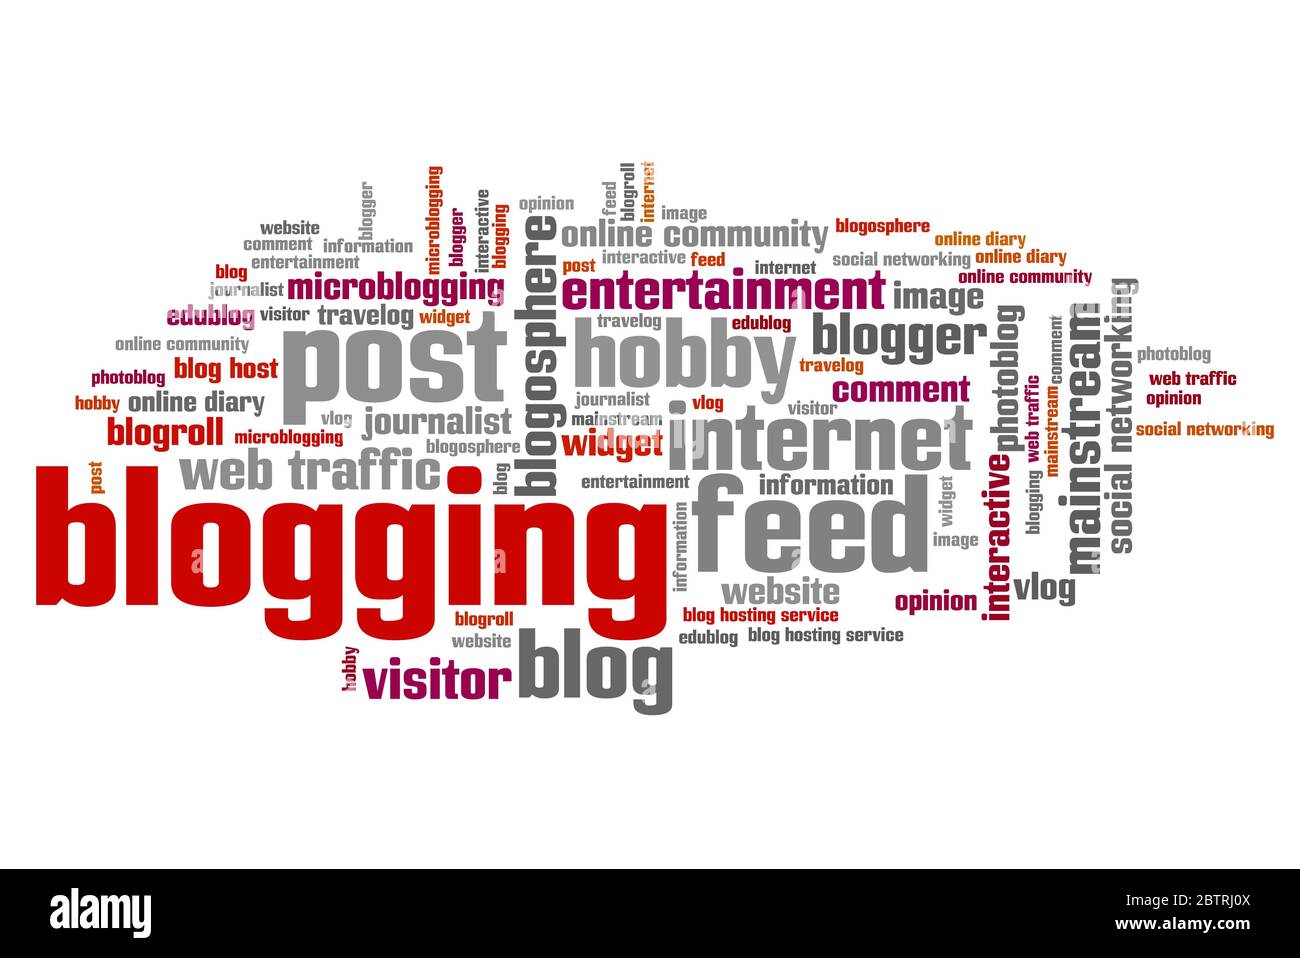 Blogging issues and concepts word cloud illustration. Word collage concept. Stock Photo